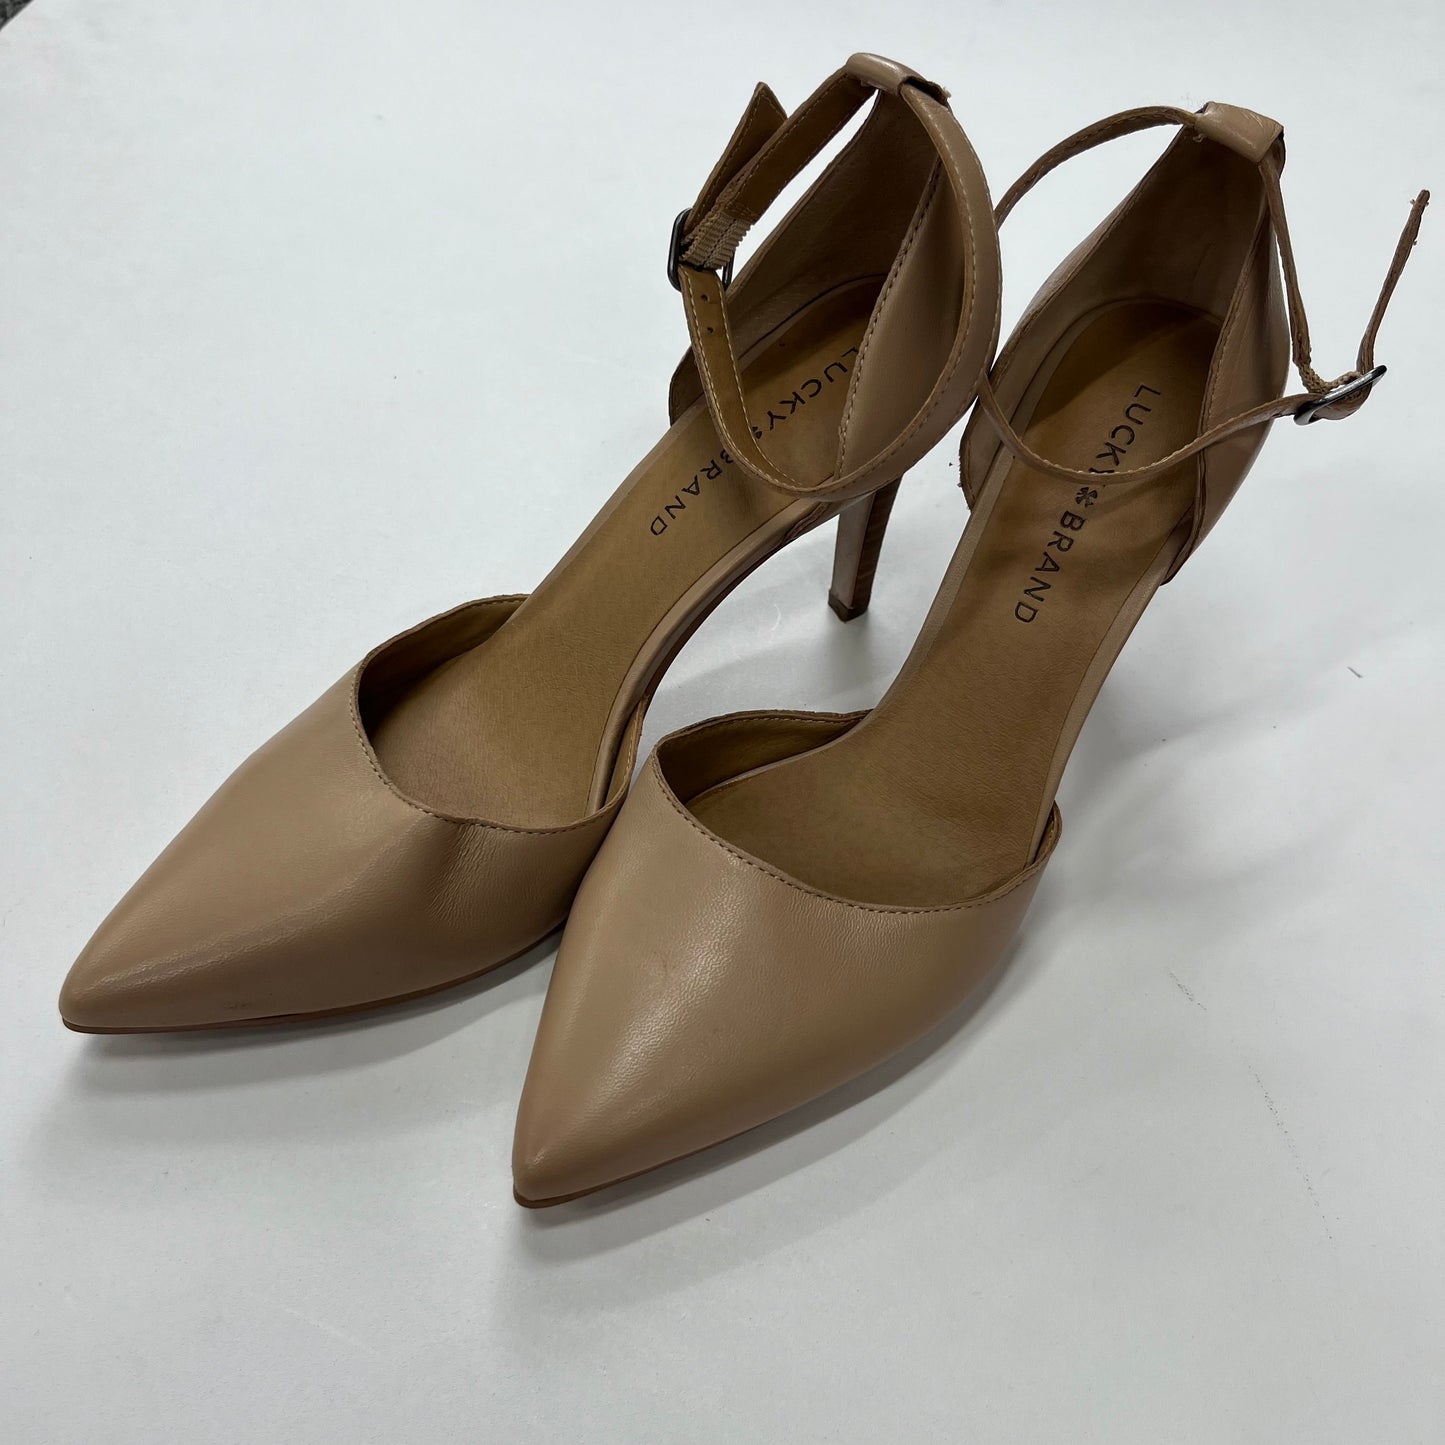 Tan Shoes Heels D Orsay Lucky Brand, Size 8